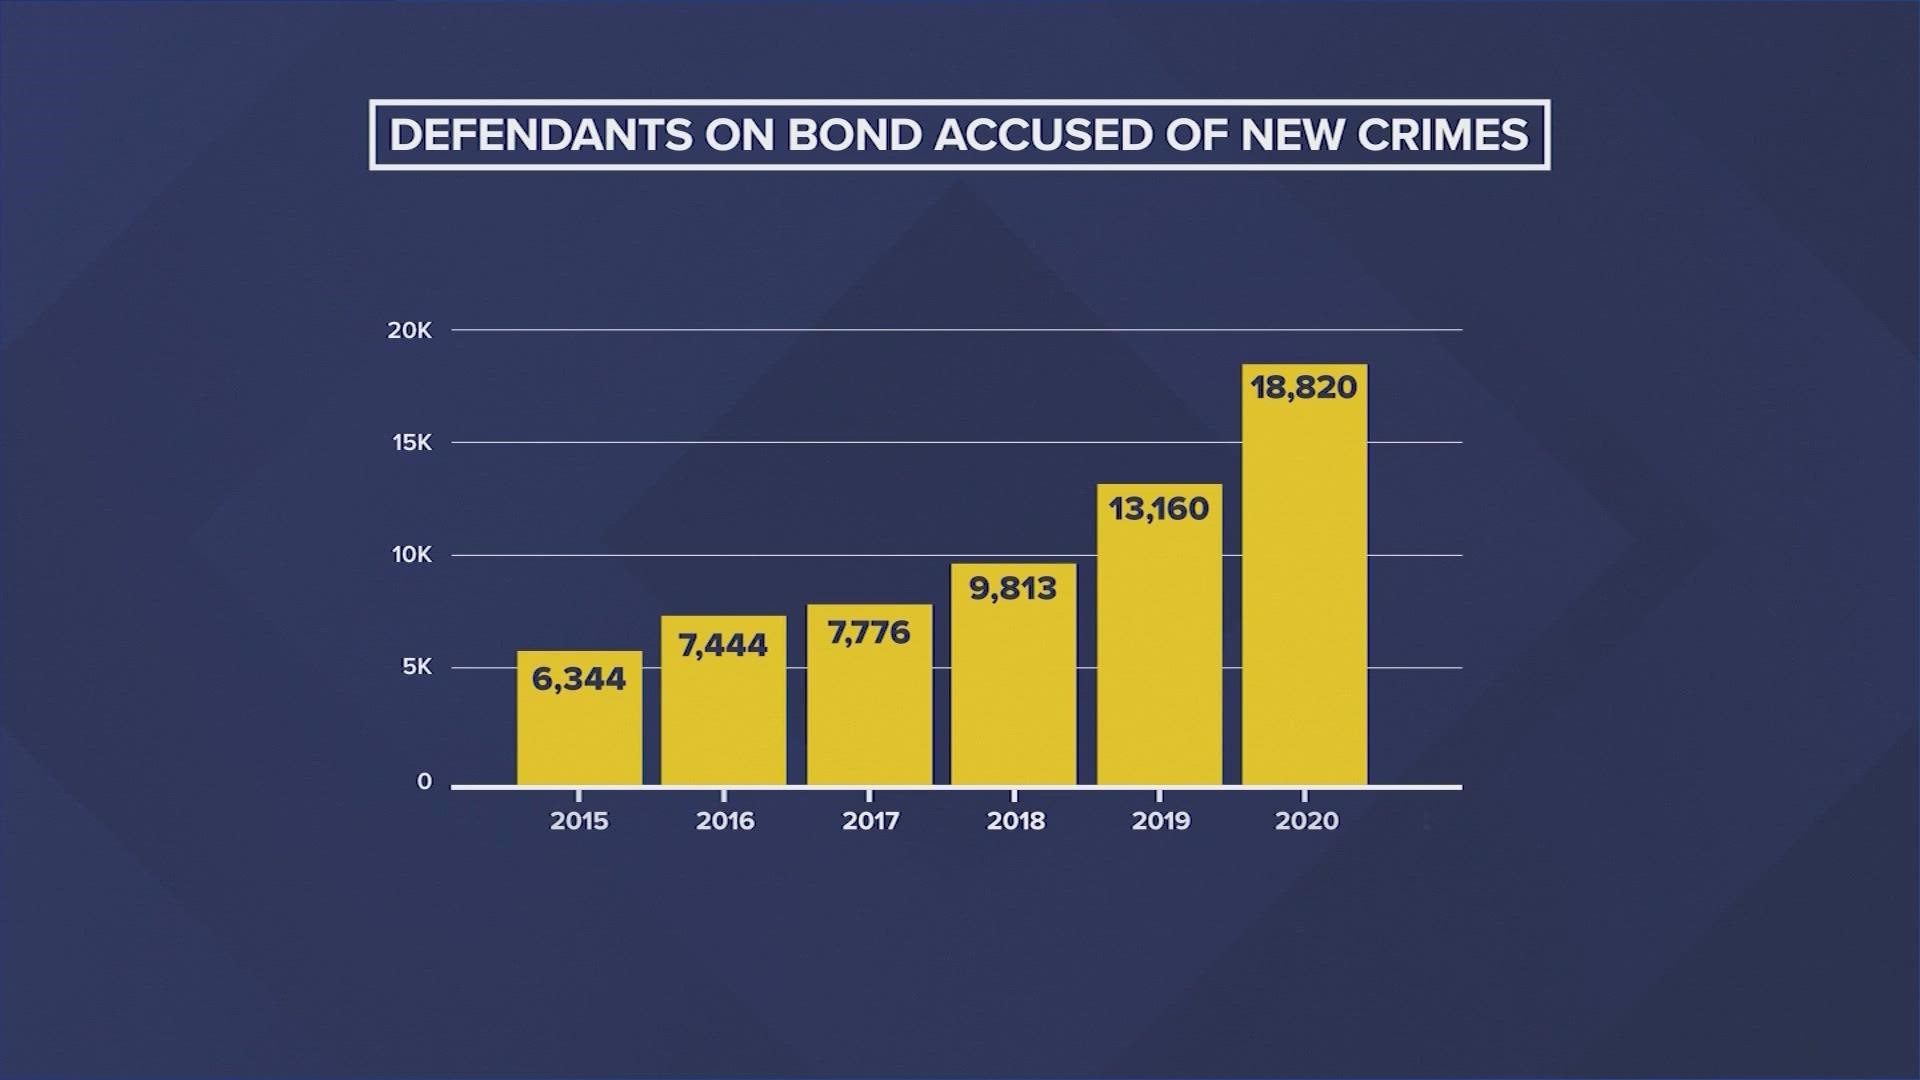 Harris County District Attorney Kim Ogg said crime is rising, cases are backlogged and too many offenders are being let out on bond after bond after bond.